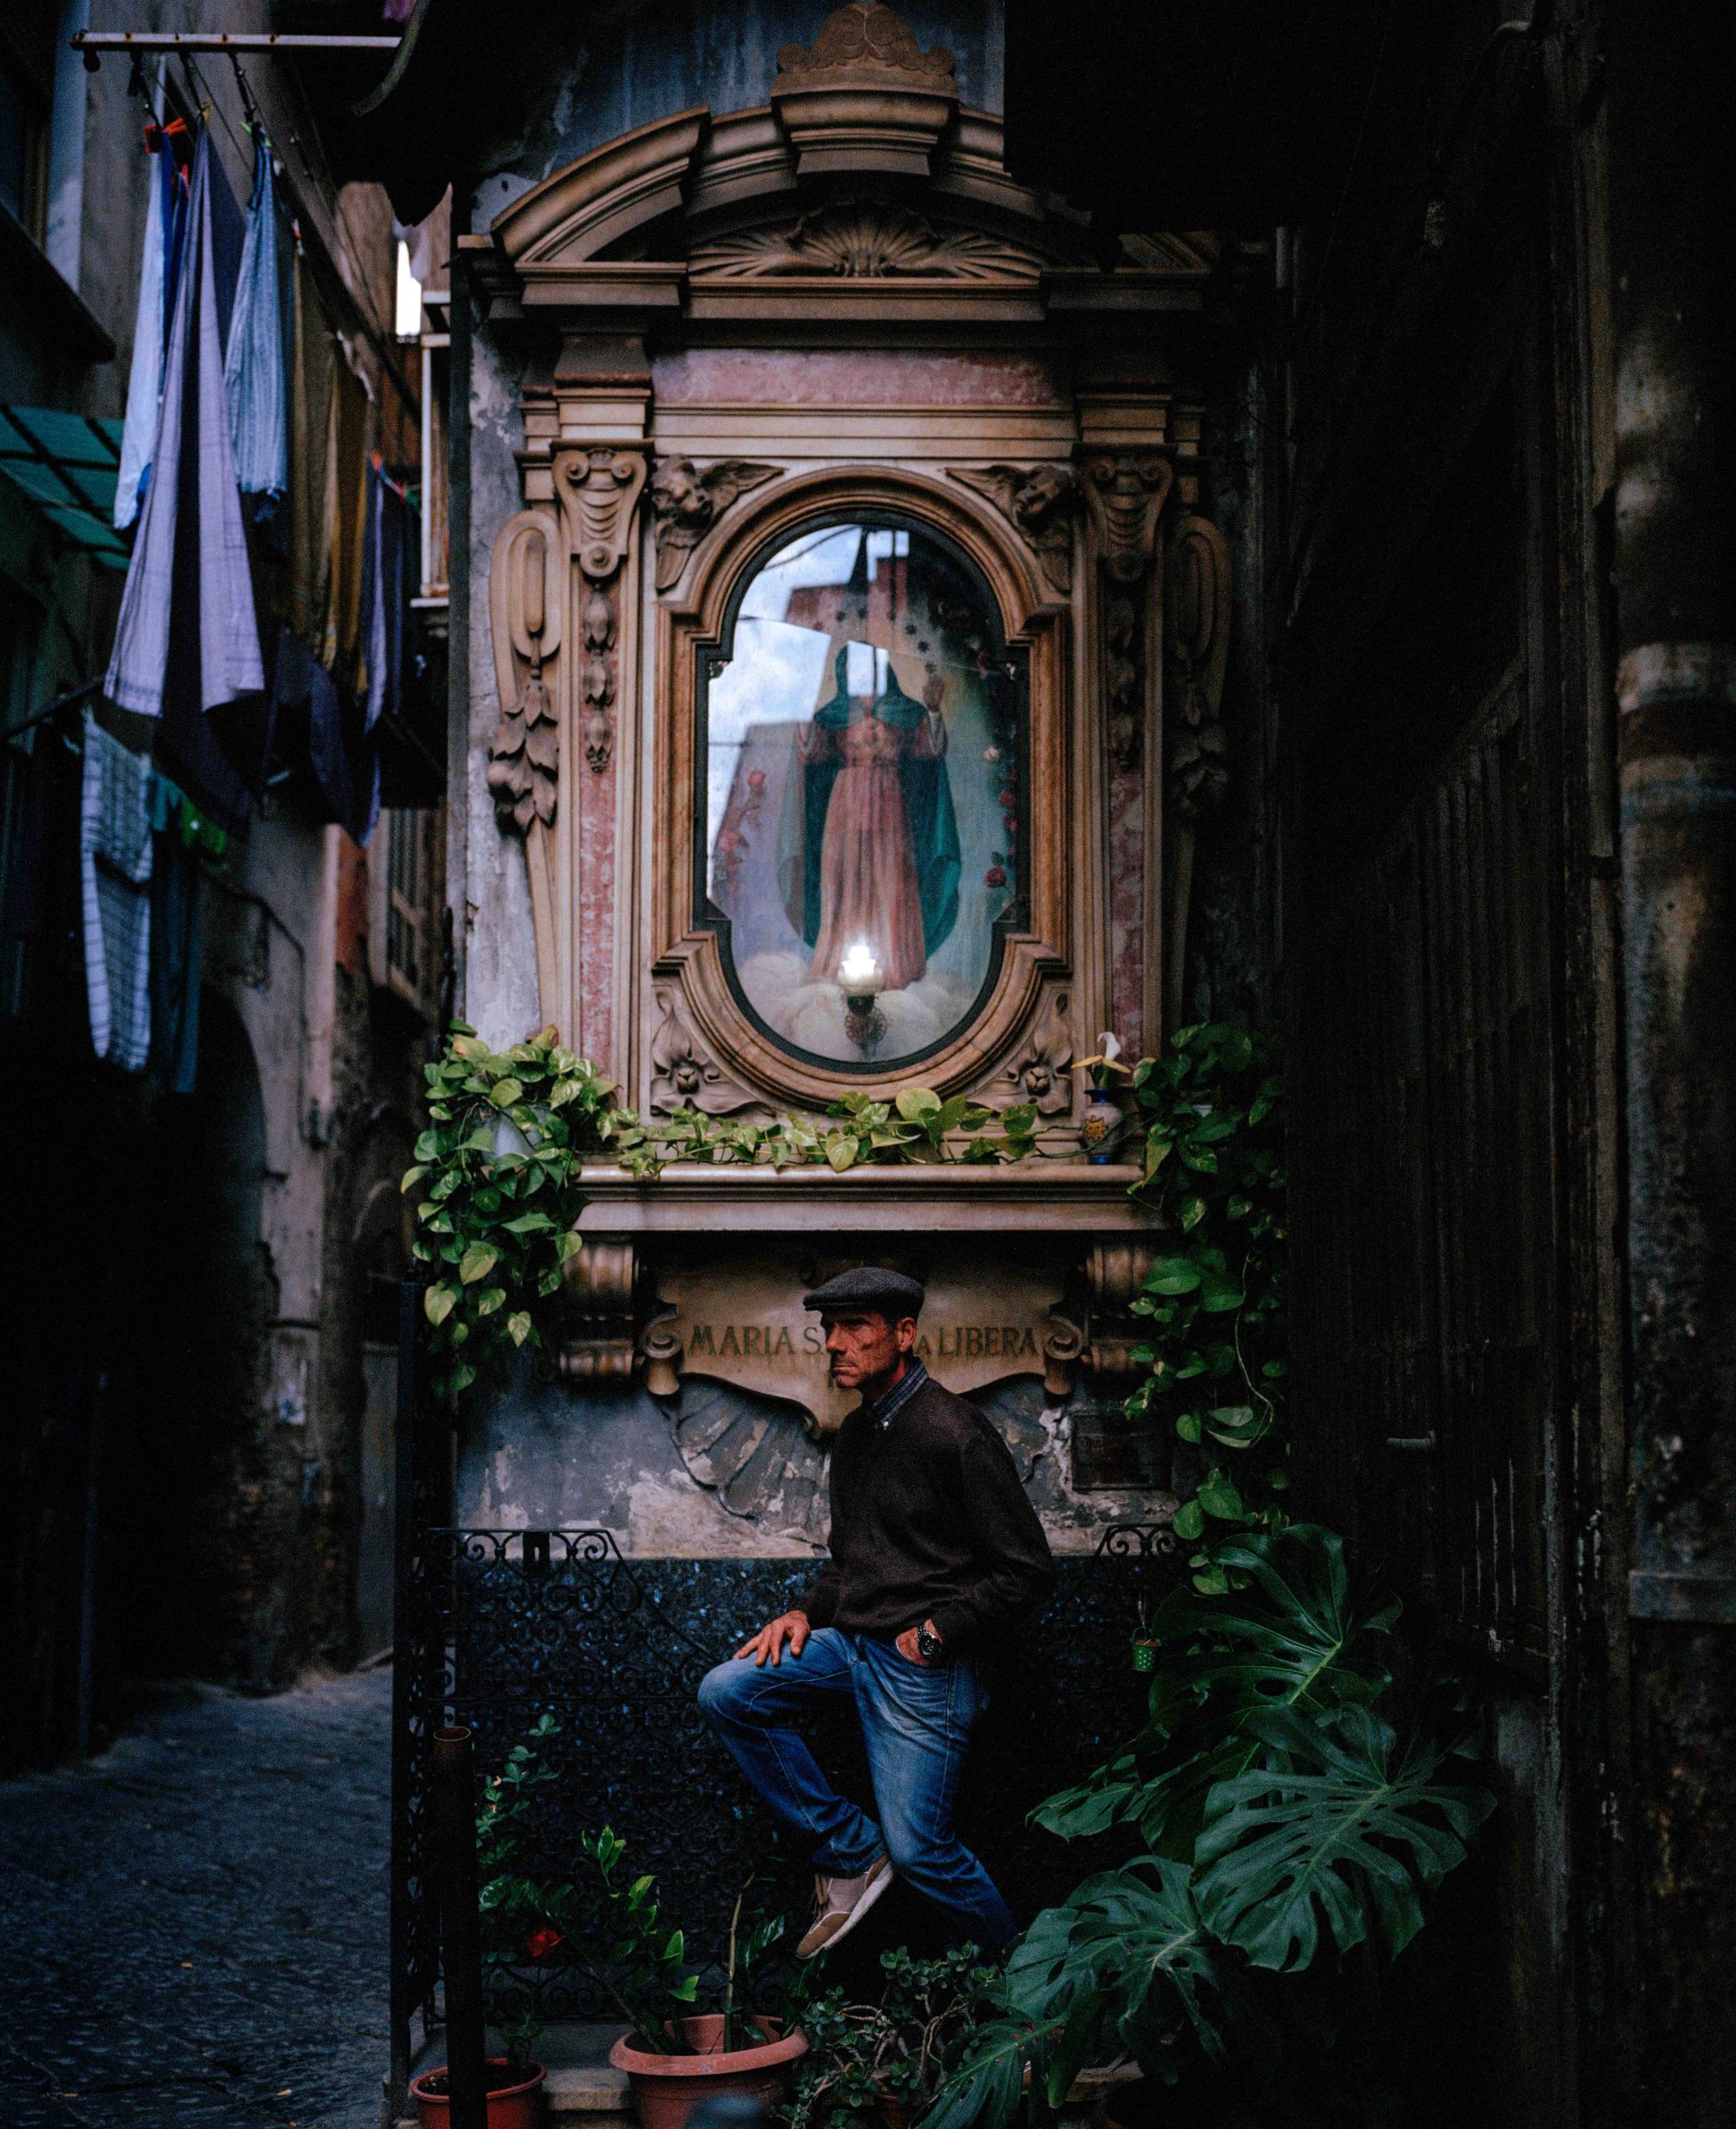 Naples, a touching darkness